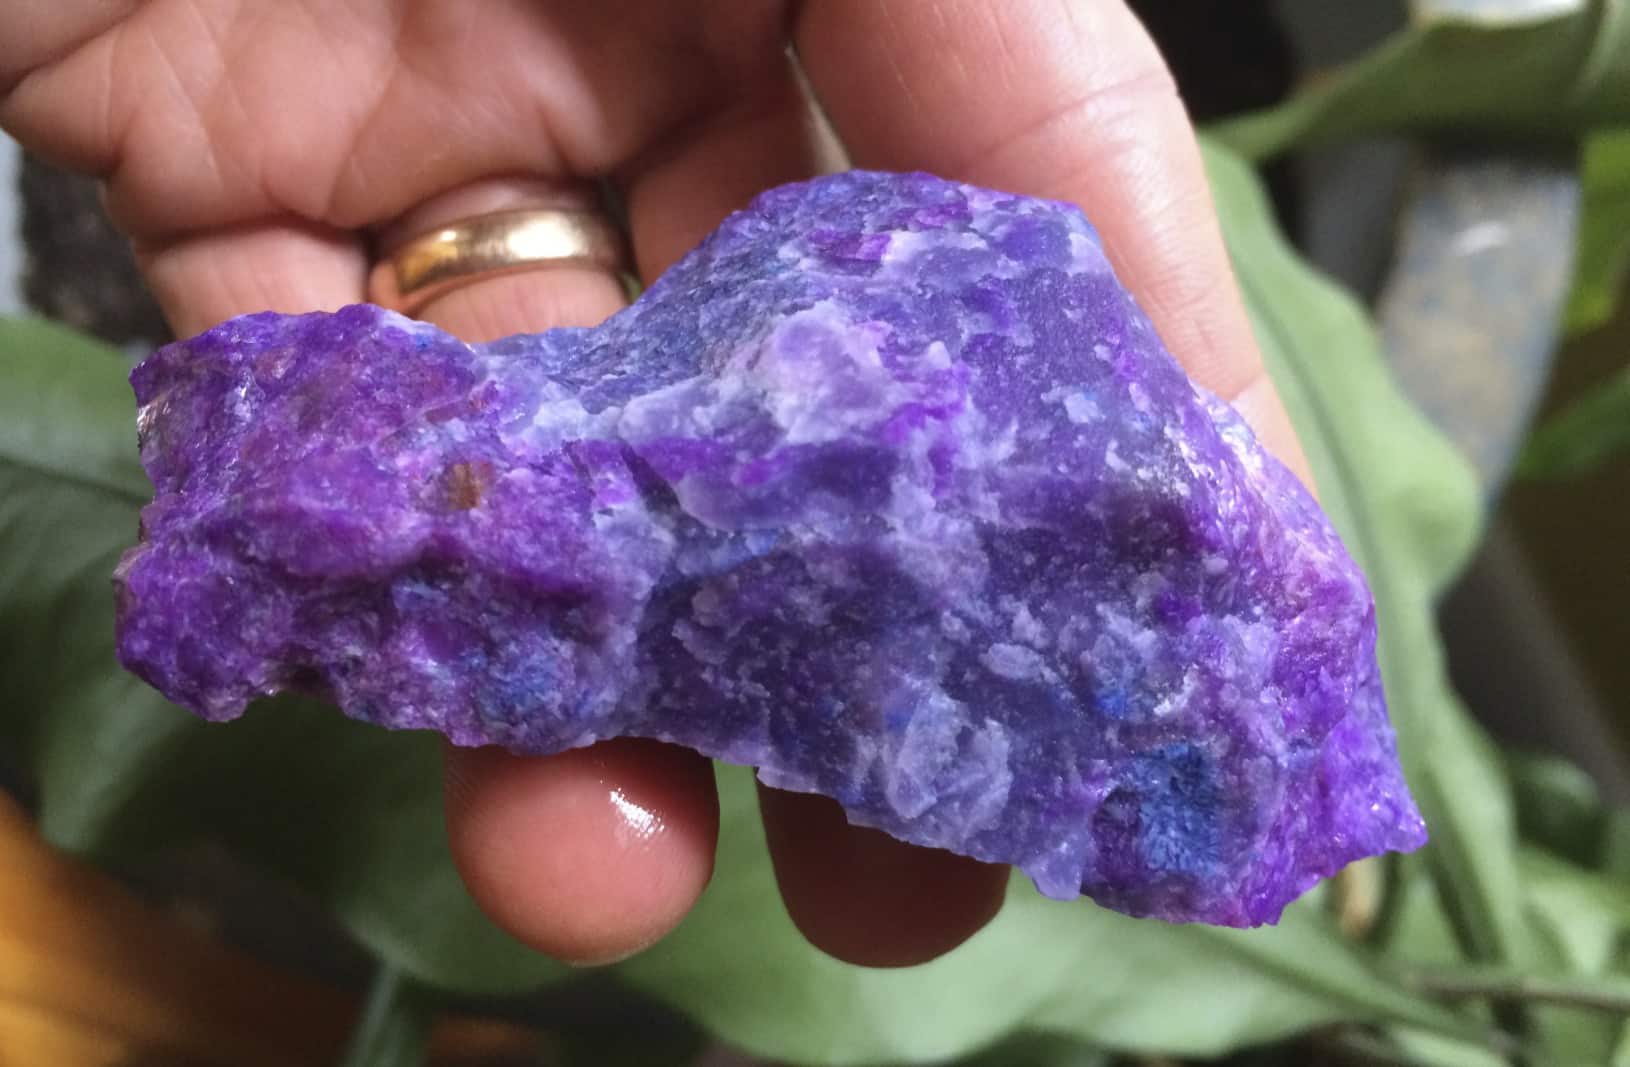 Wet Sugilite - 'the other purple stone' - symbolizes the materialization (or concretization) of Spiritual vision.